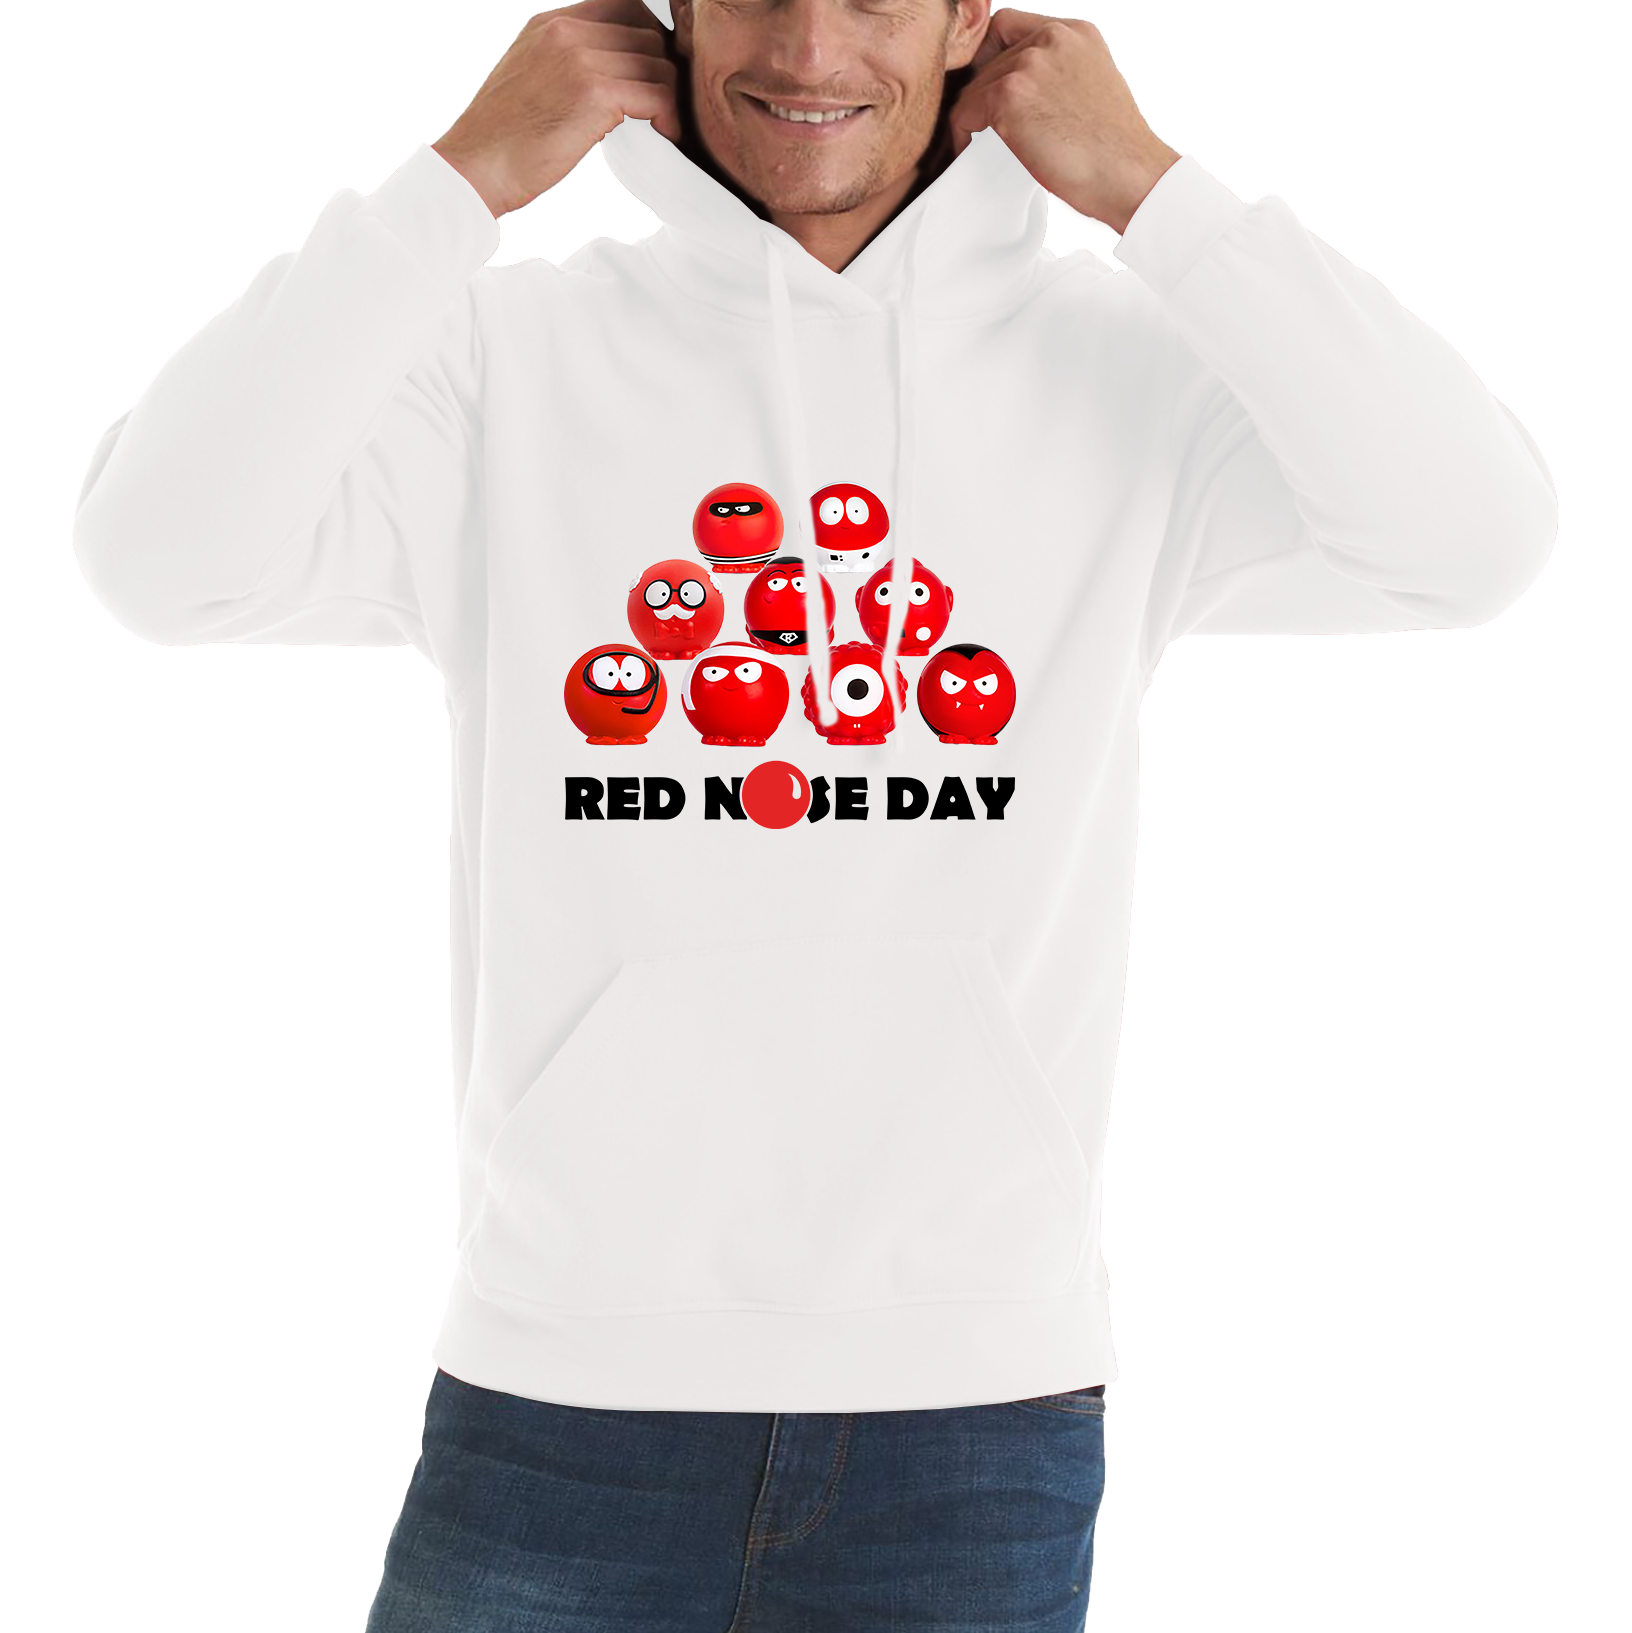 Red Nose Day Comic Relief Noses Adult Hoodie. 50% Goes To Charity